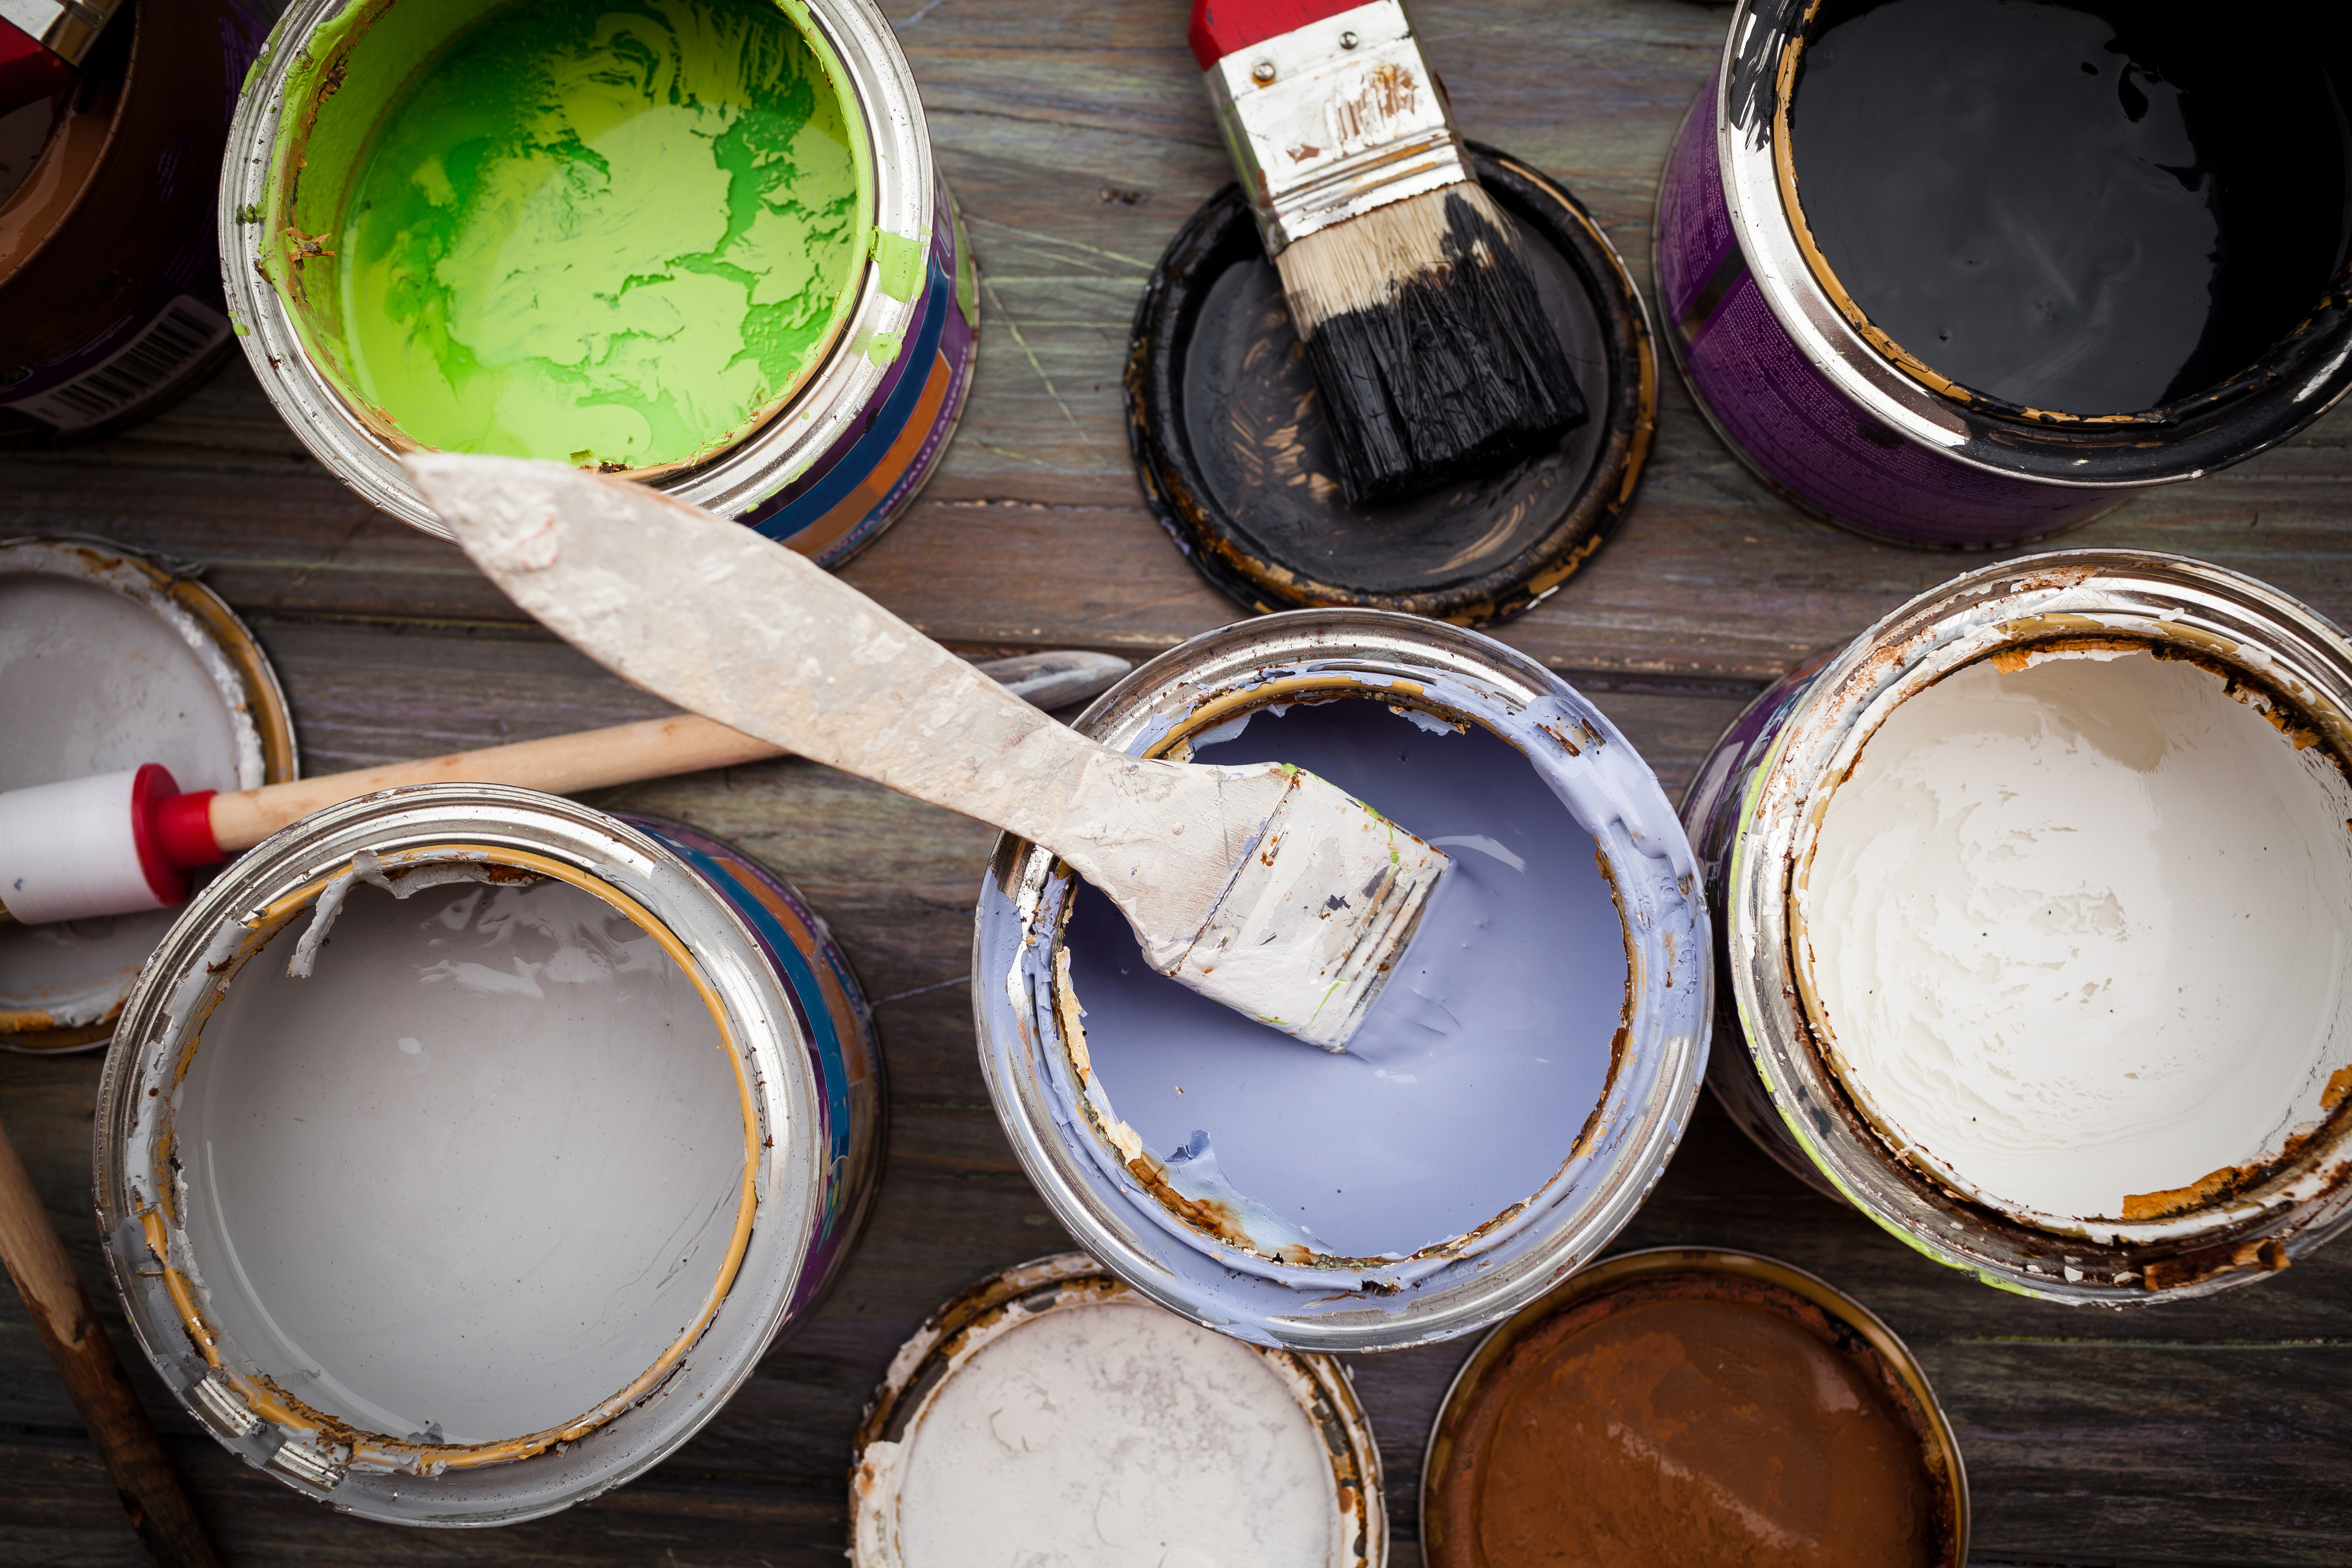 Many colorful cans of paint open with paintbrushes sitting in them. Picture from above.